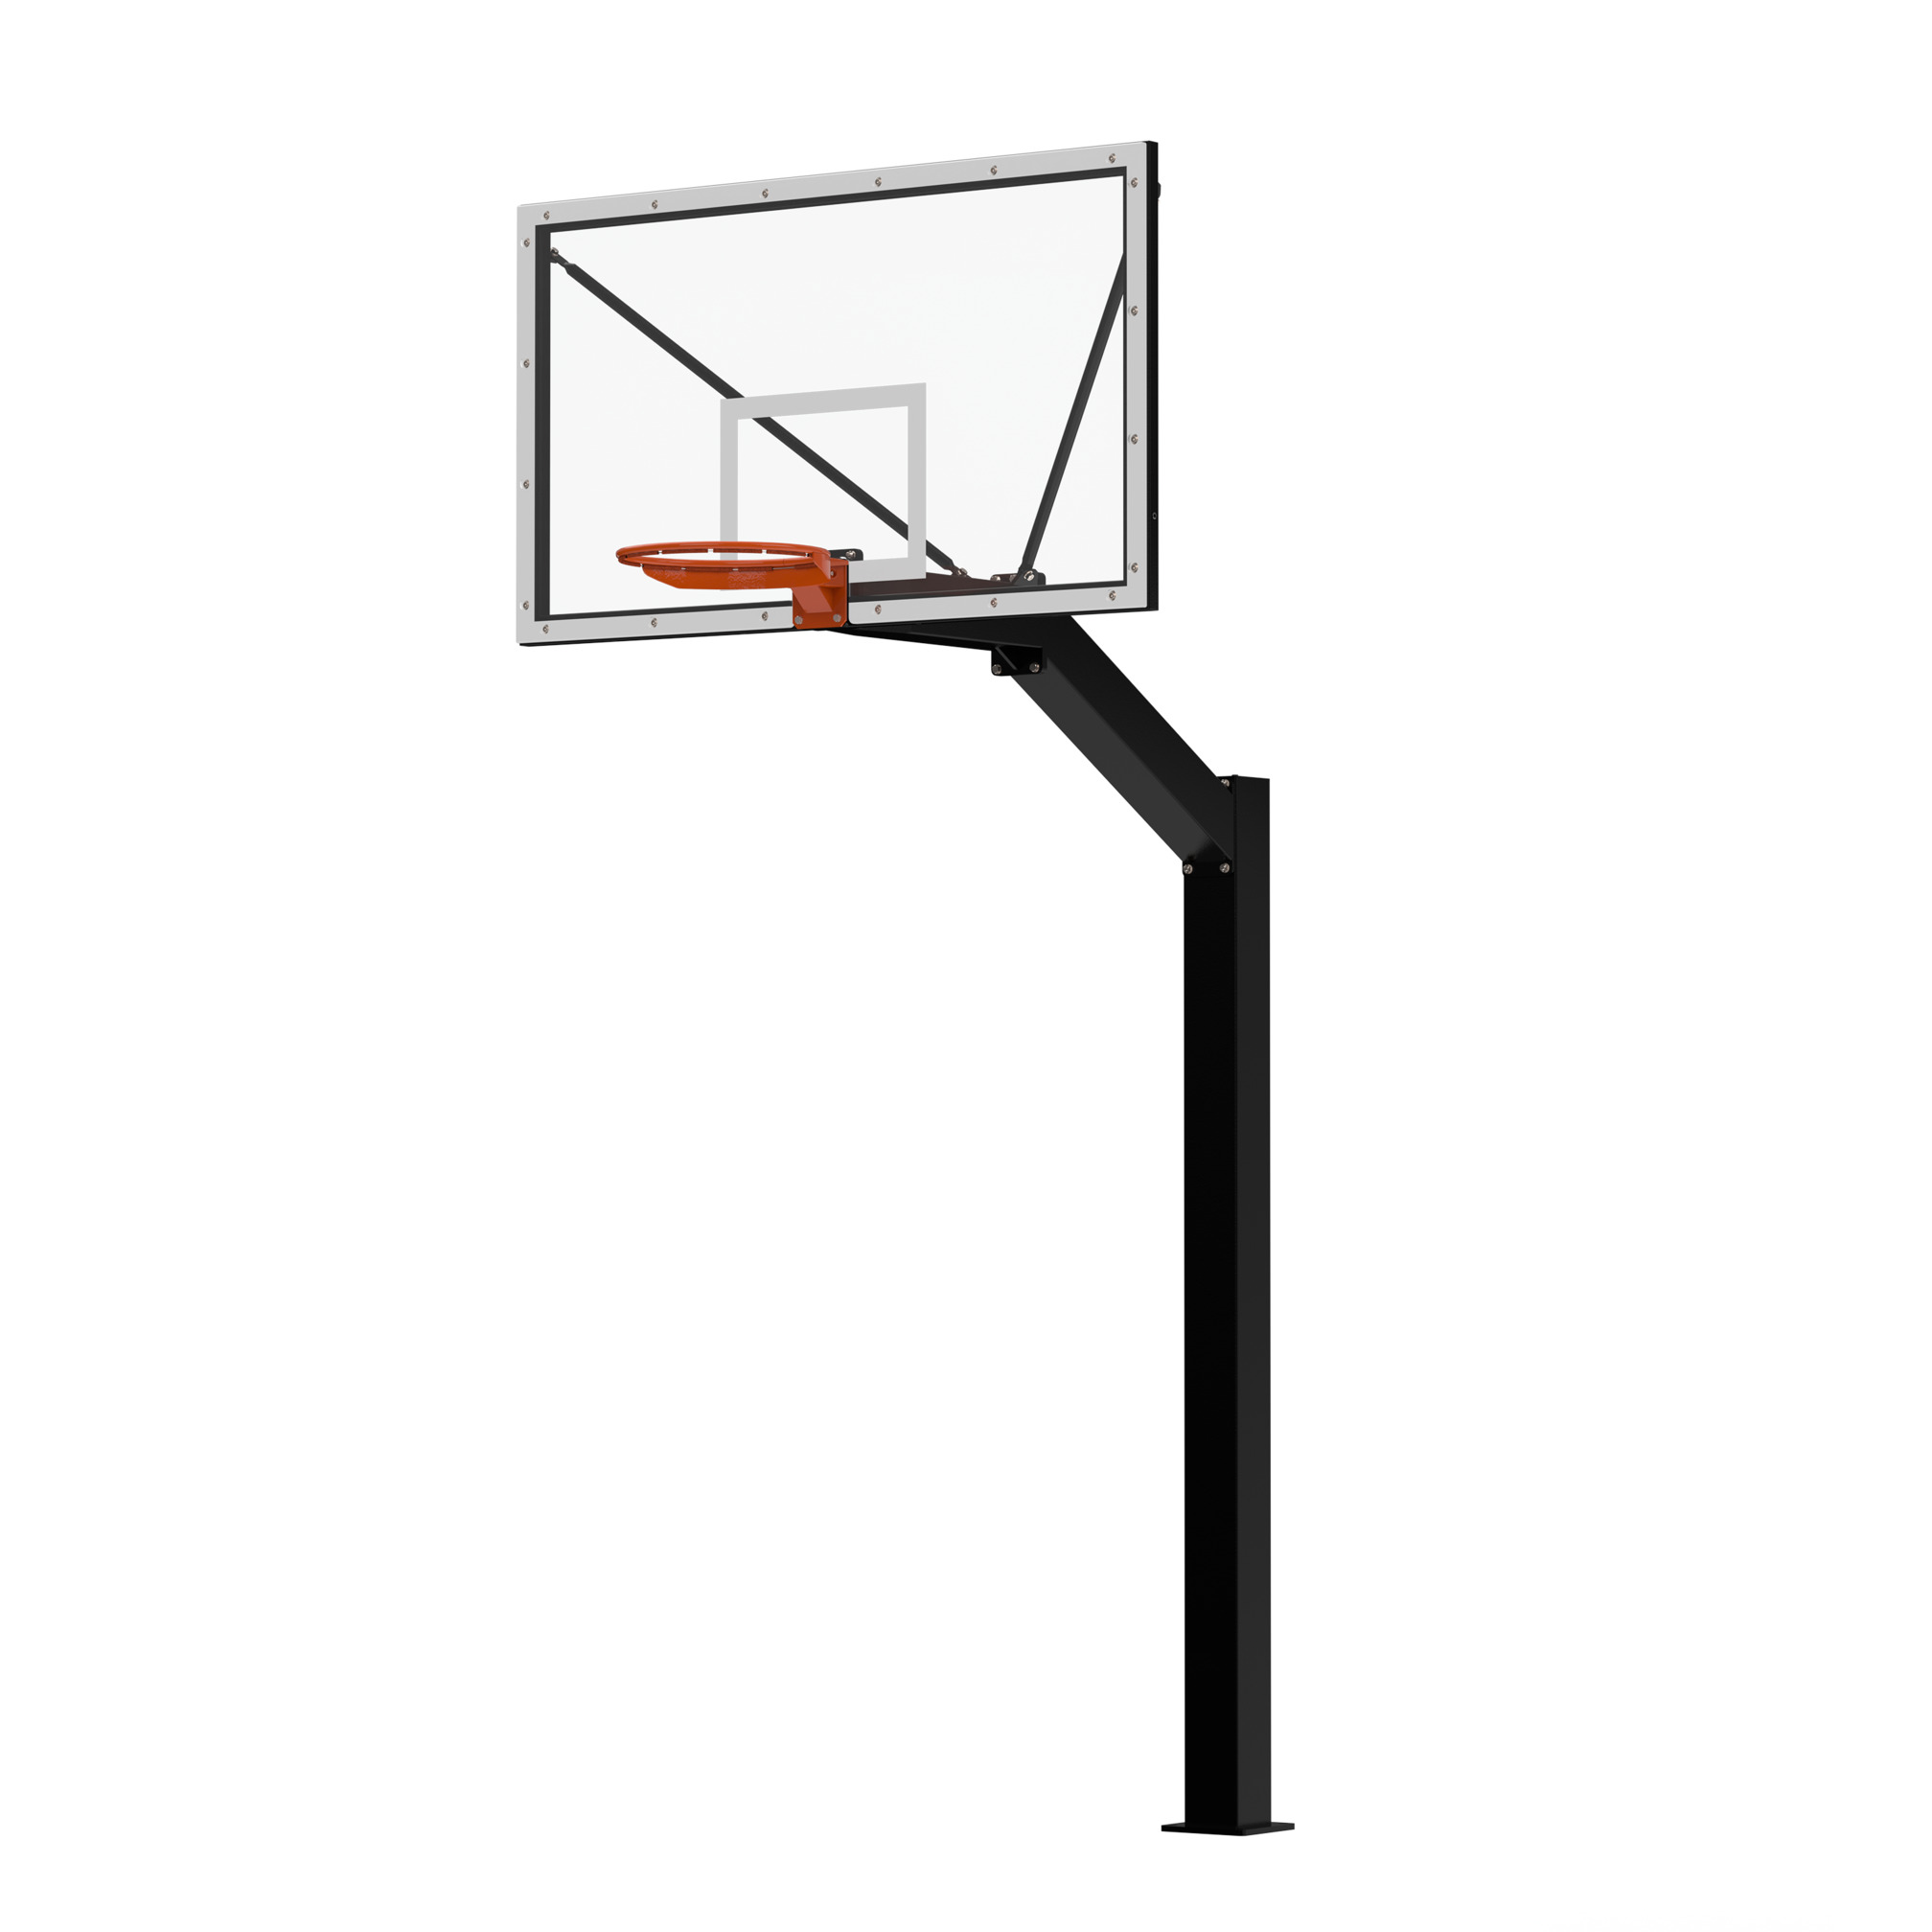 Urban Court Slammer 165 cm projection incl. Basketball ring Competition